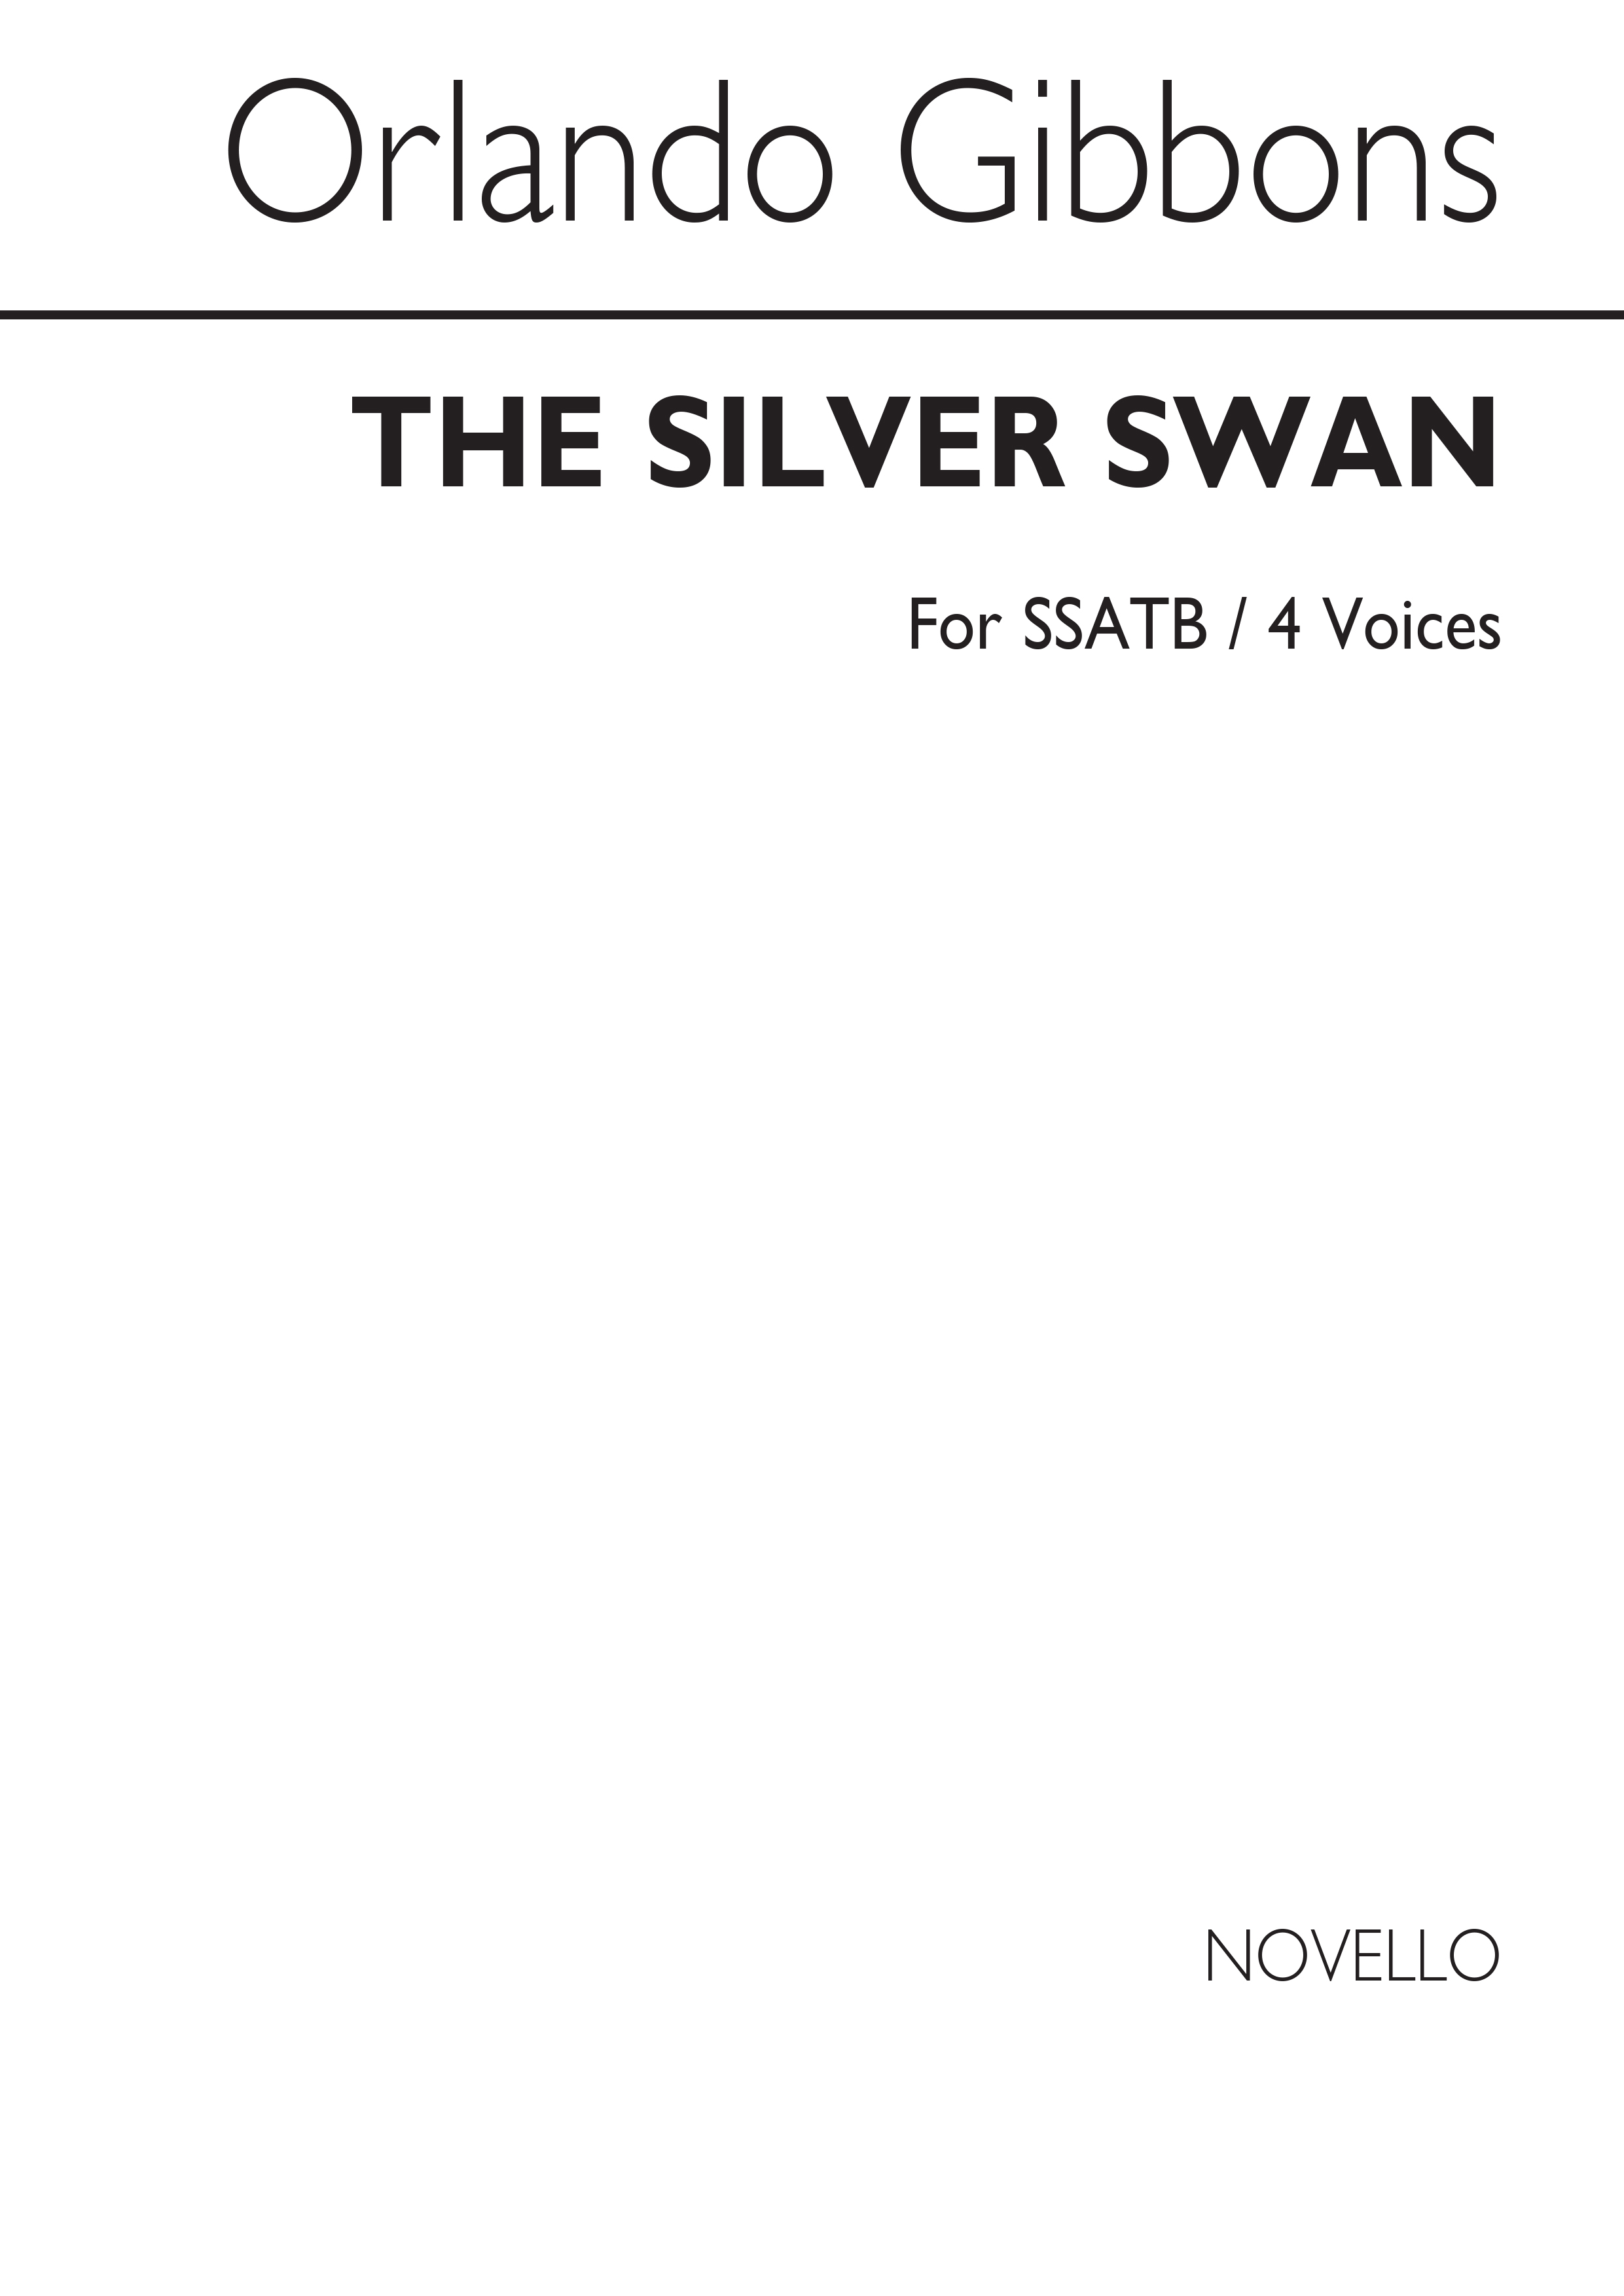 Orlando Gibbons: The Silver Swan, Aldrich: A Catch On Tobacco